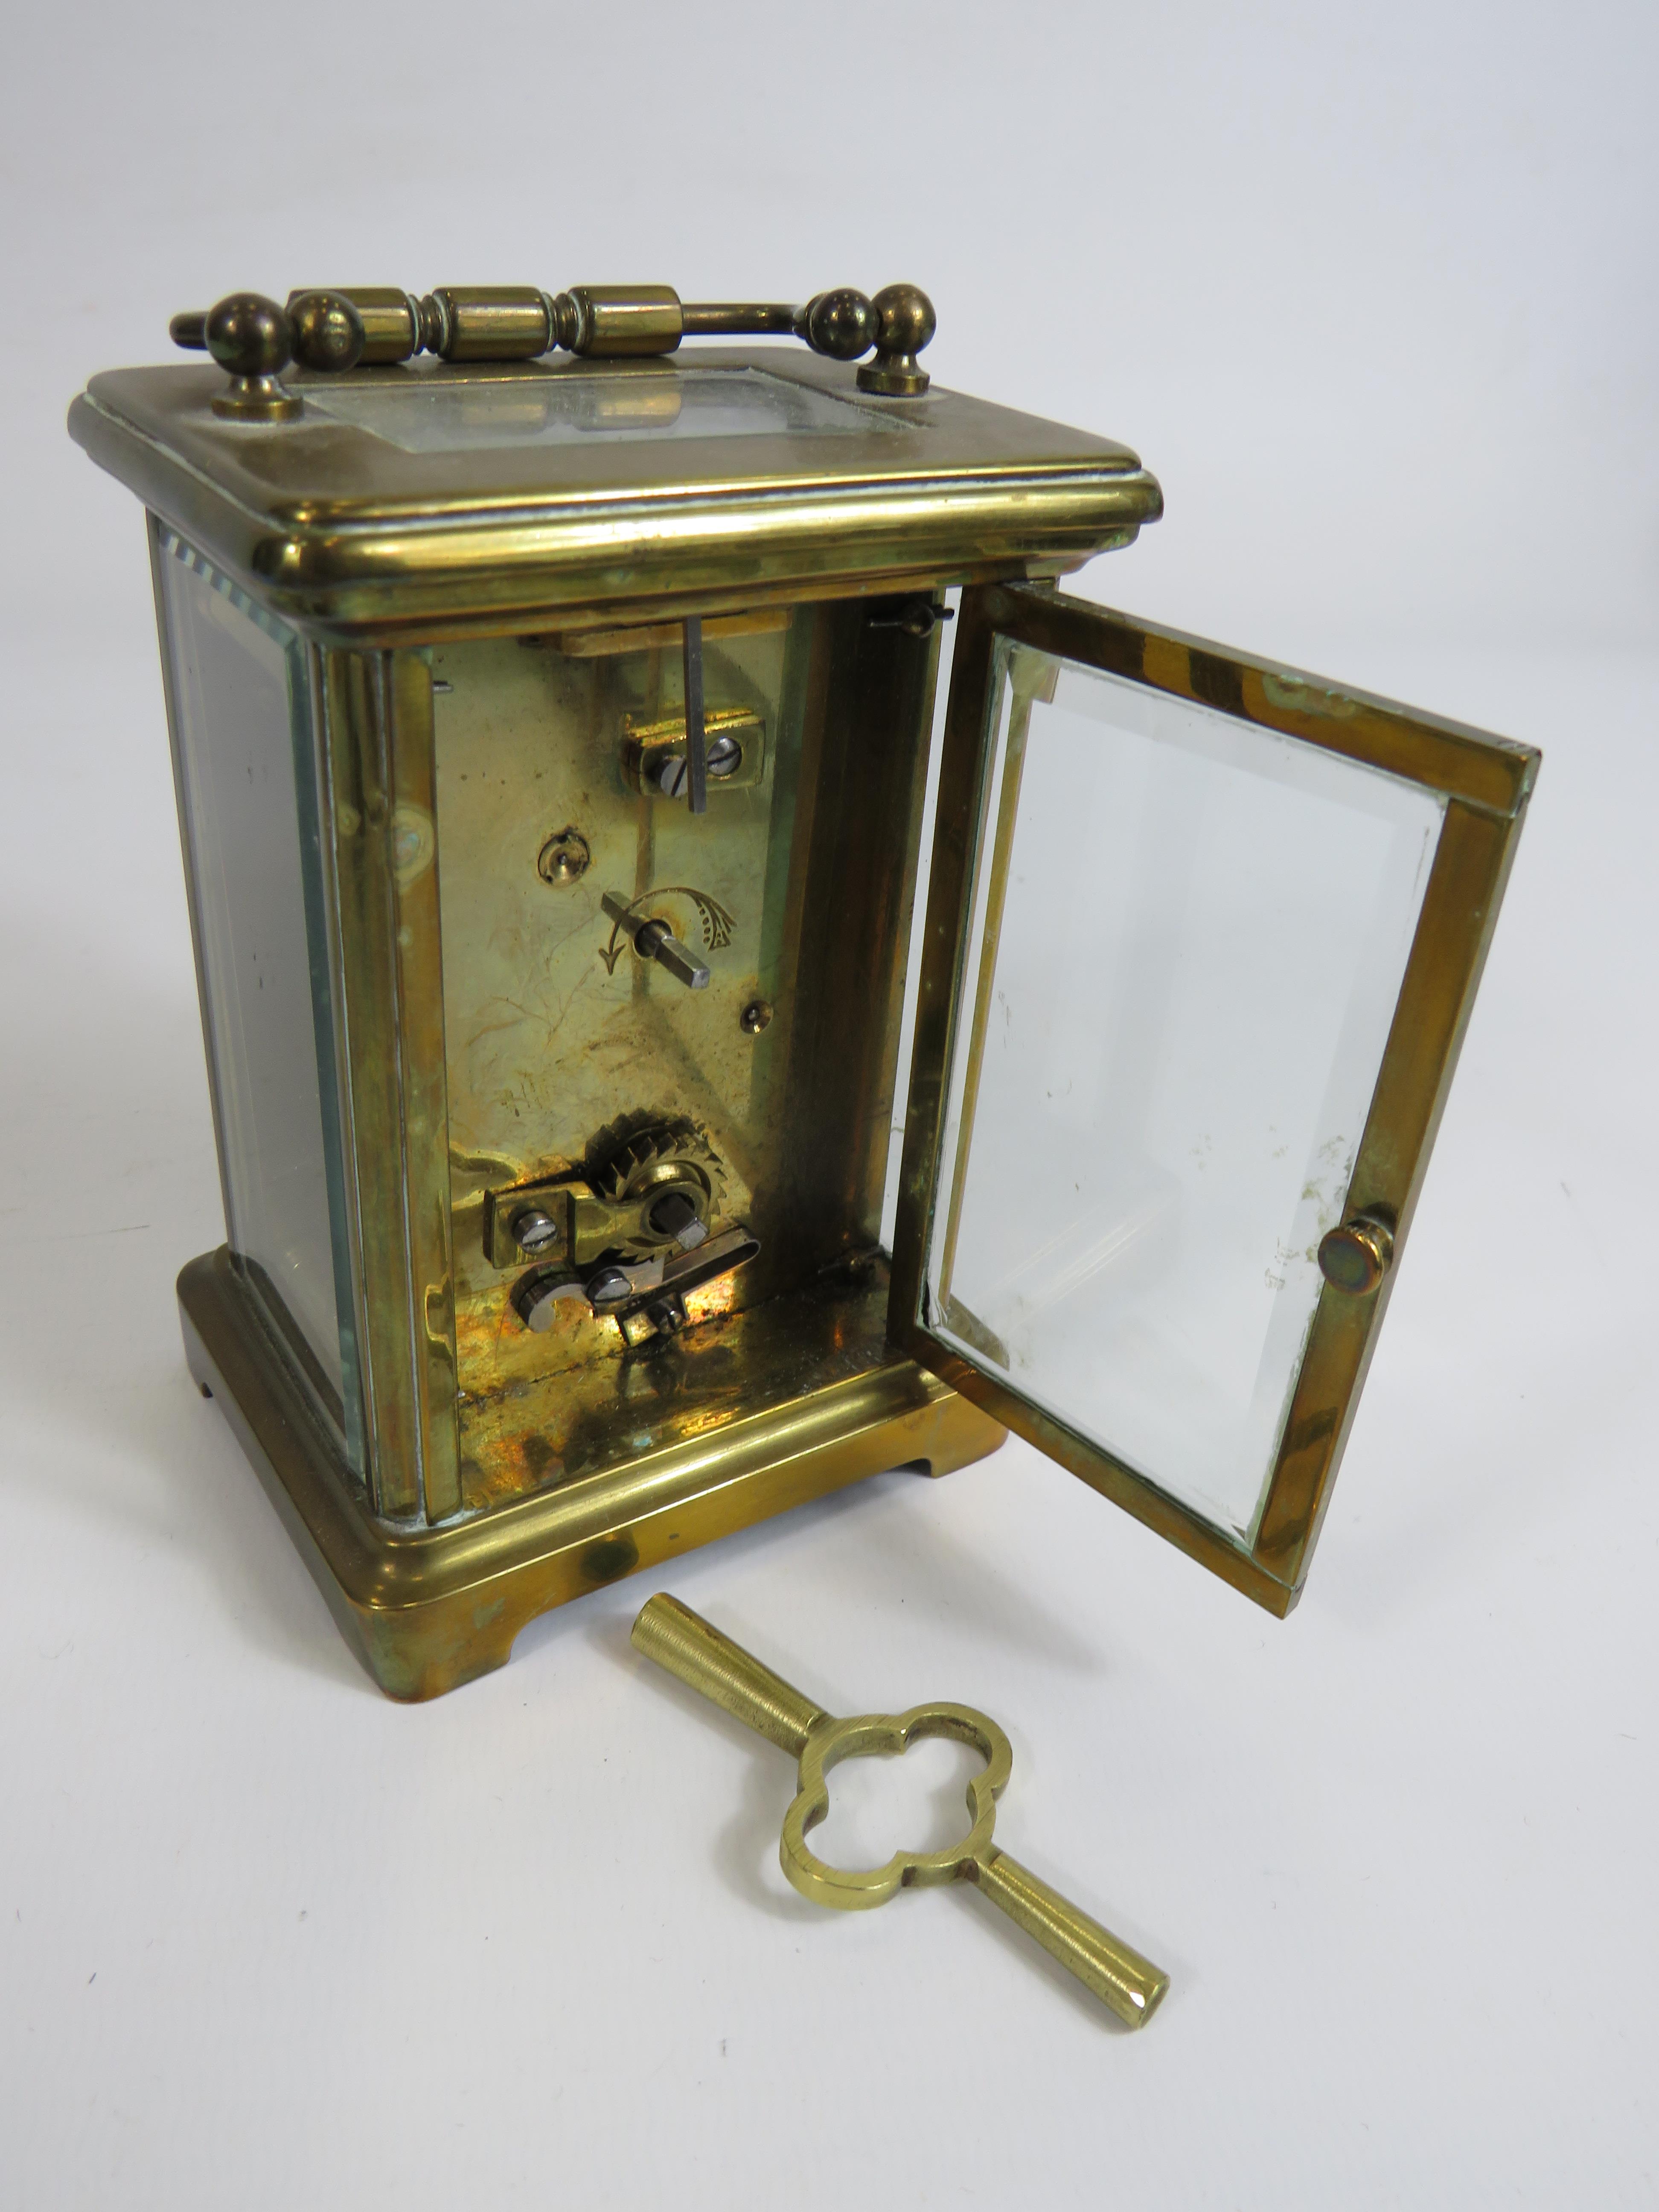 Pretty Brass Cased Carriage Clock with Key, enamel face. Running order 4.5 inches tall. ( door opens - Image 6 of 7